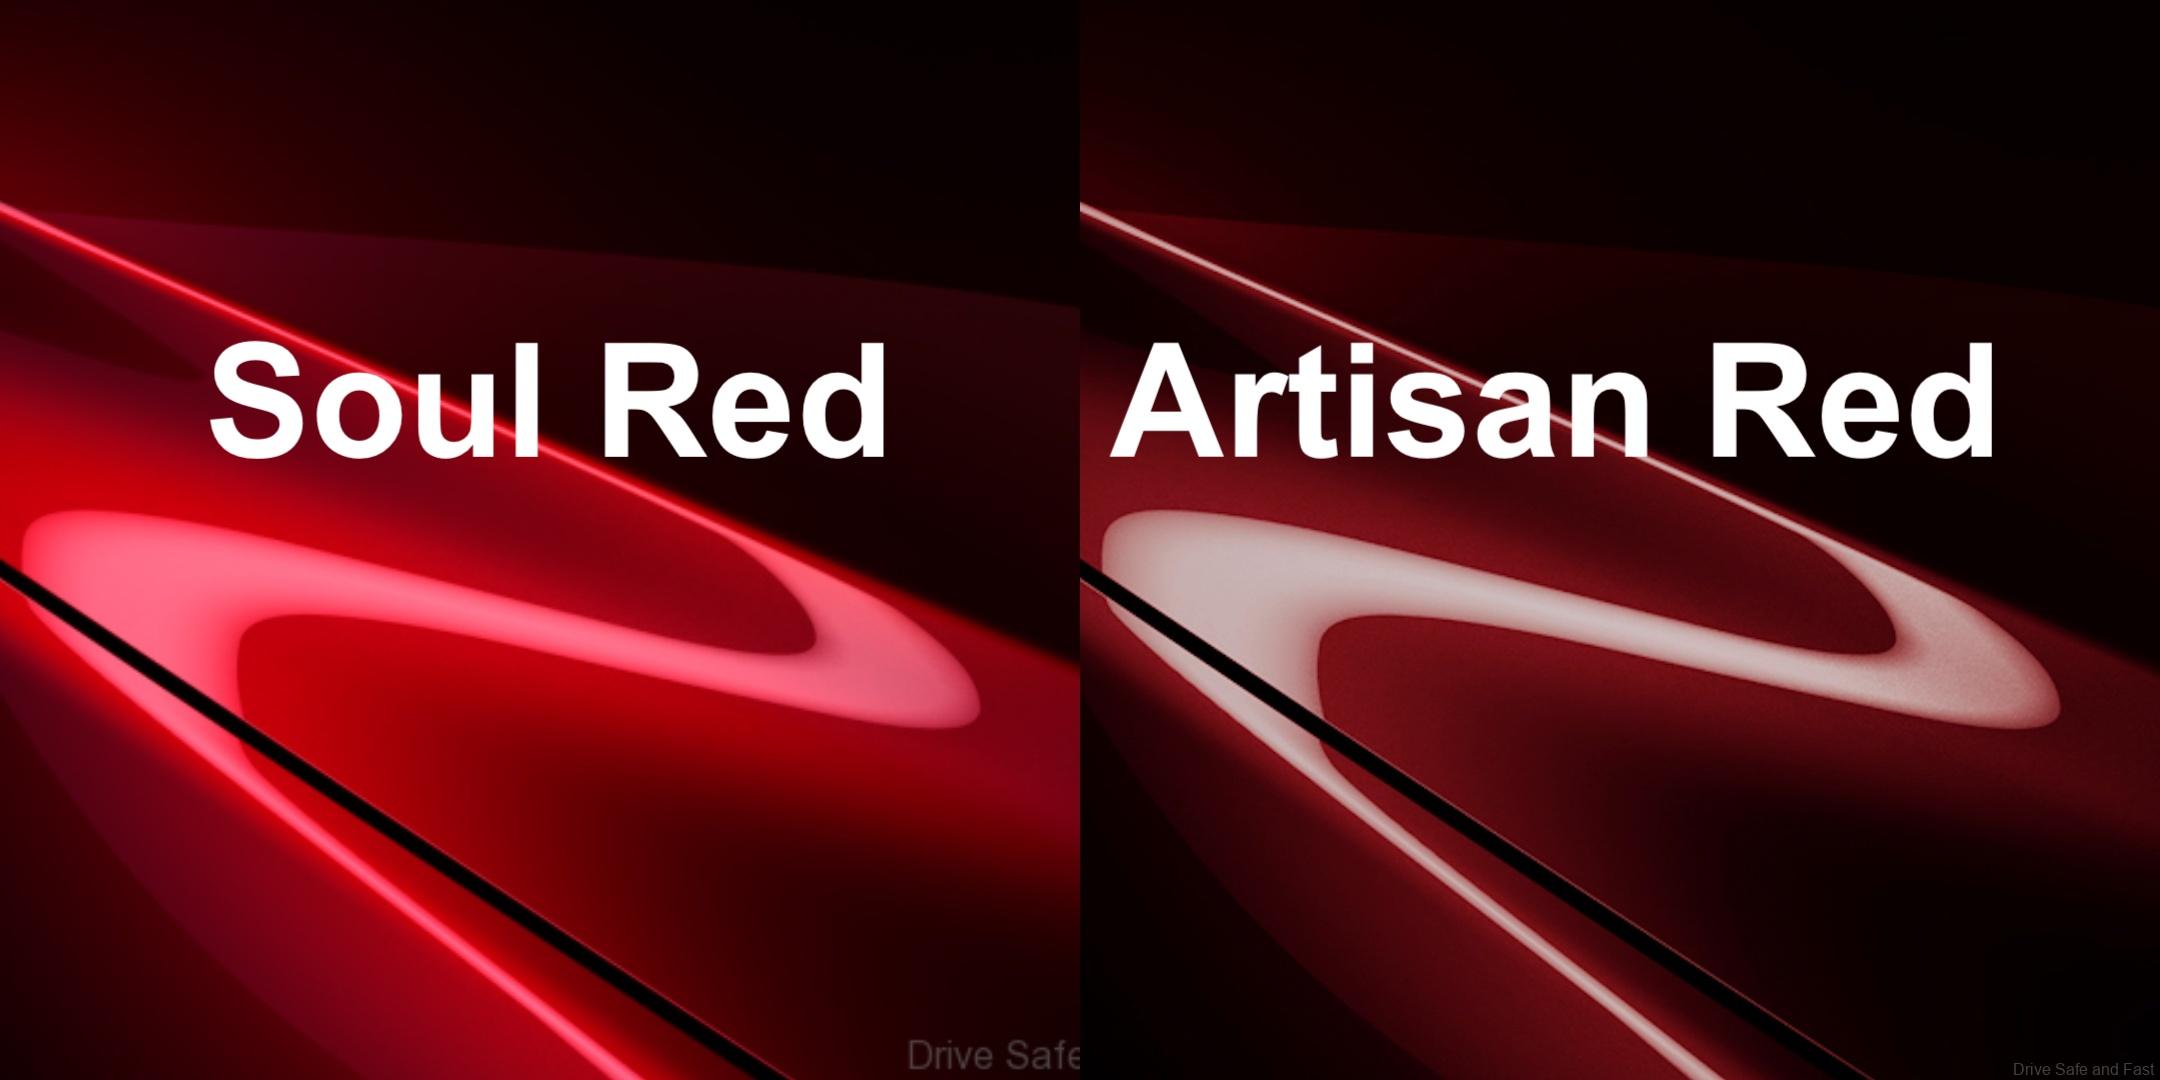 A New Special Colour Called 'Artisan Red